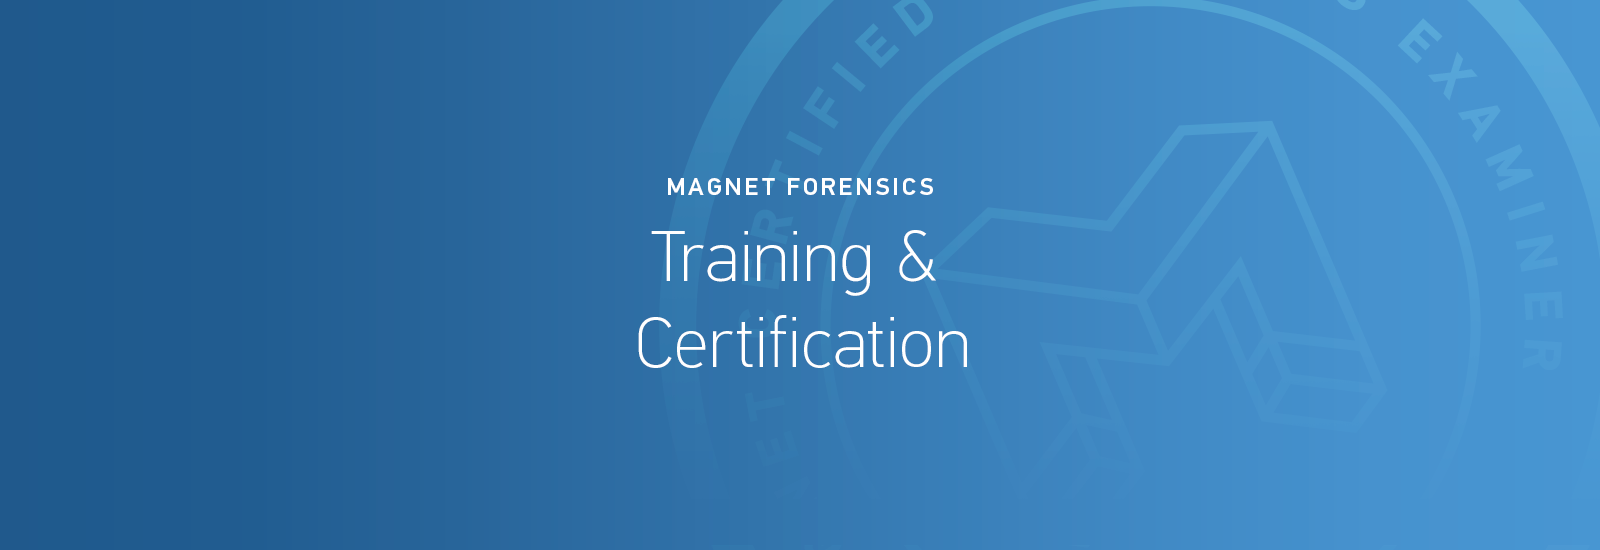 Digital Forensics and Incident Response (DFIR) Training, Courses,  Certifications and Tools